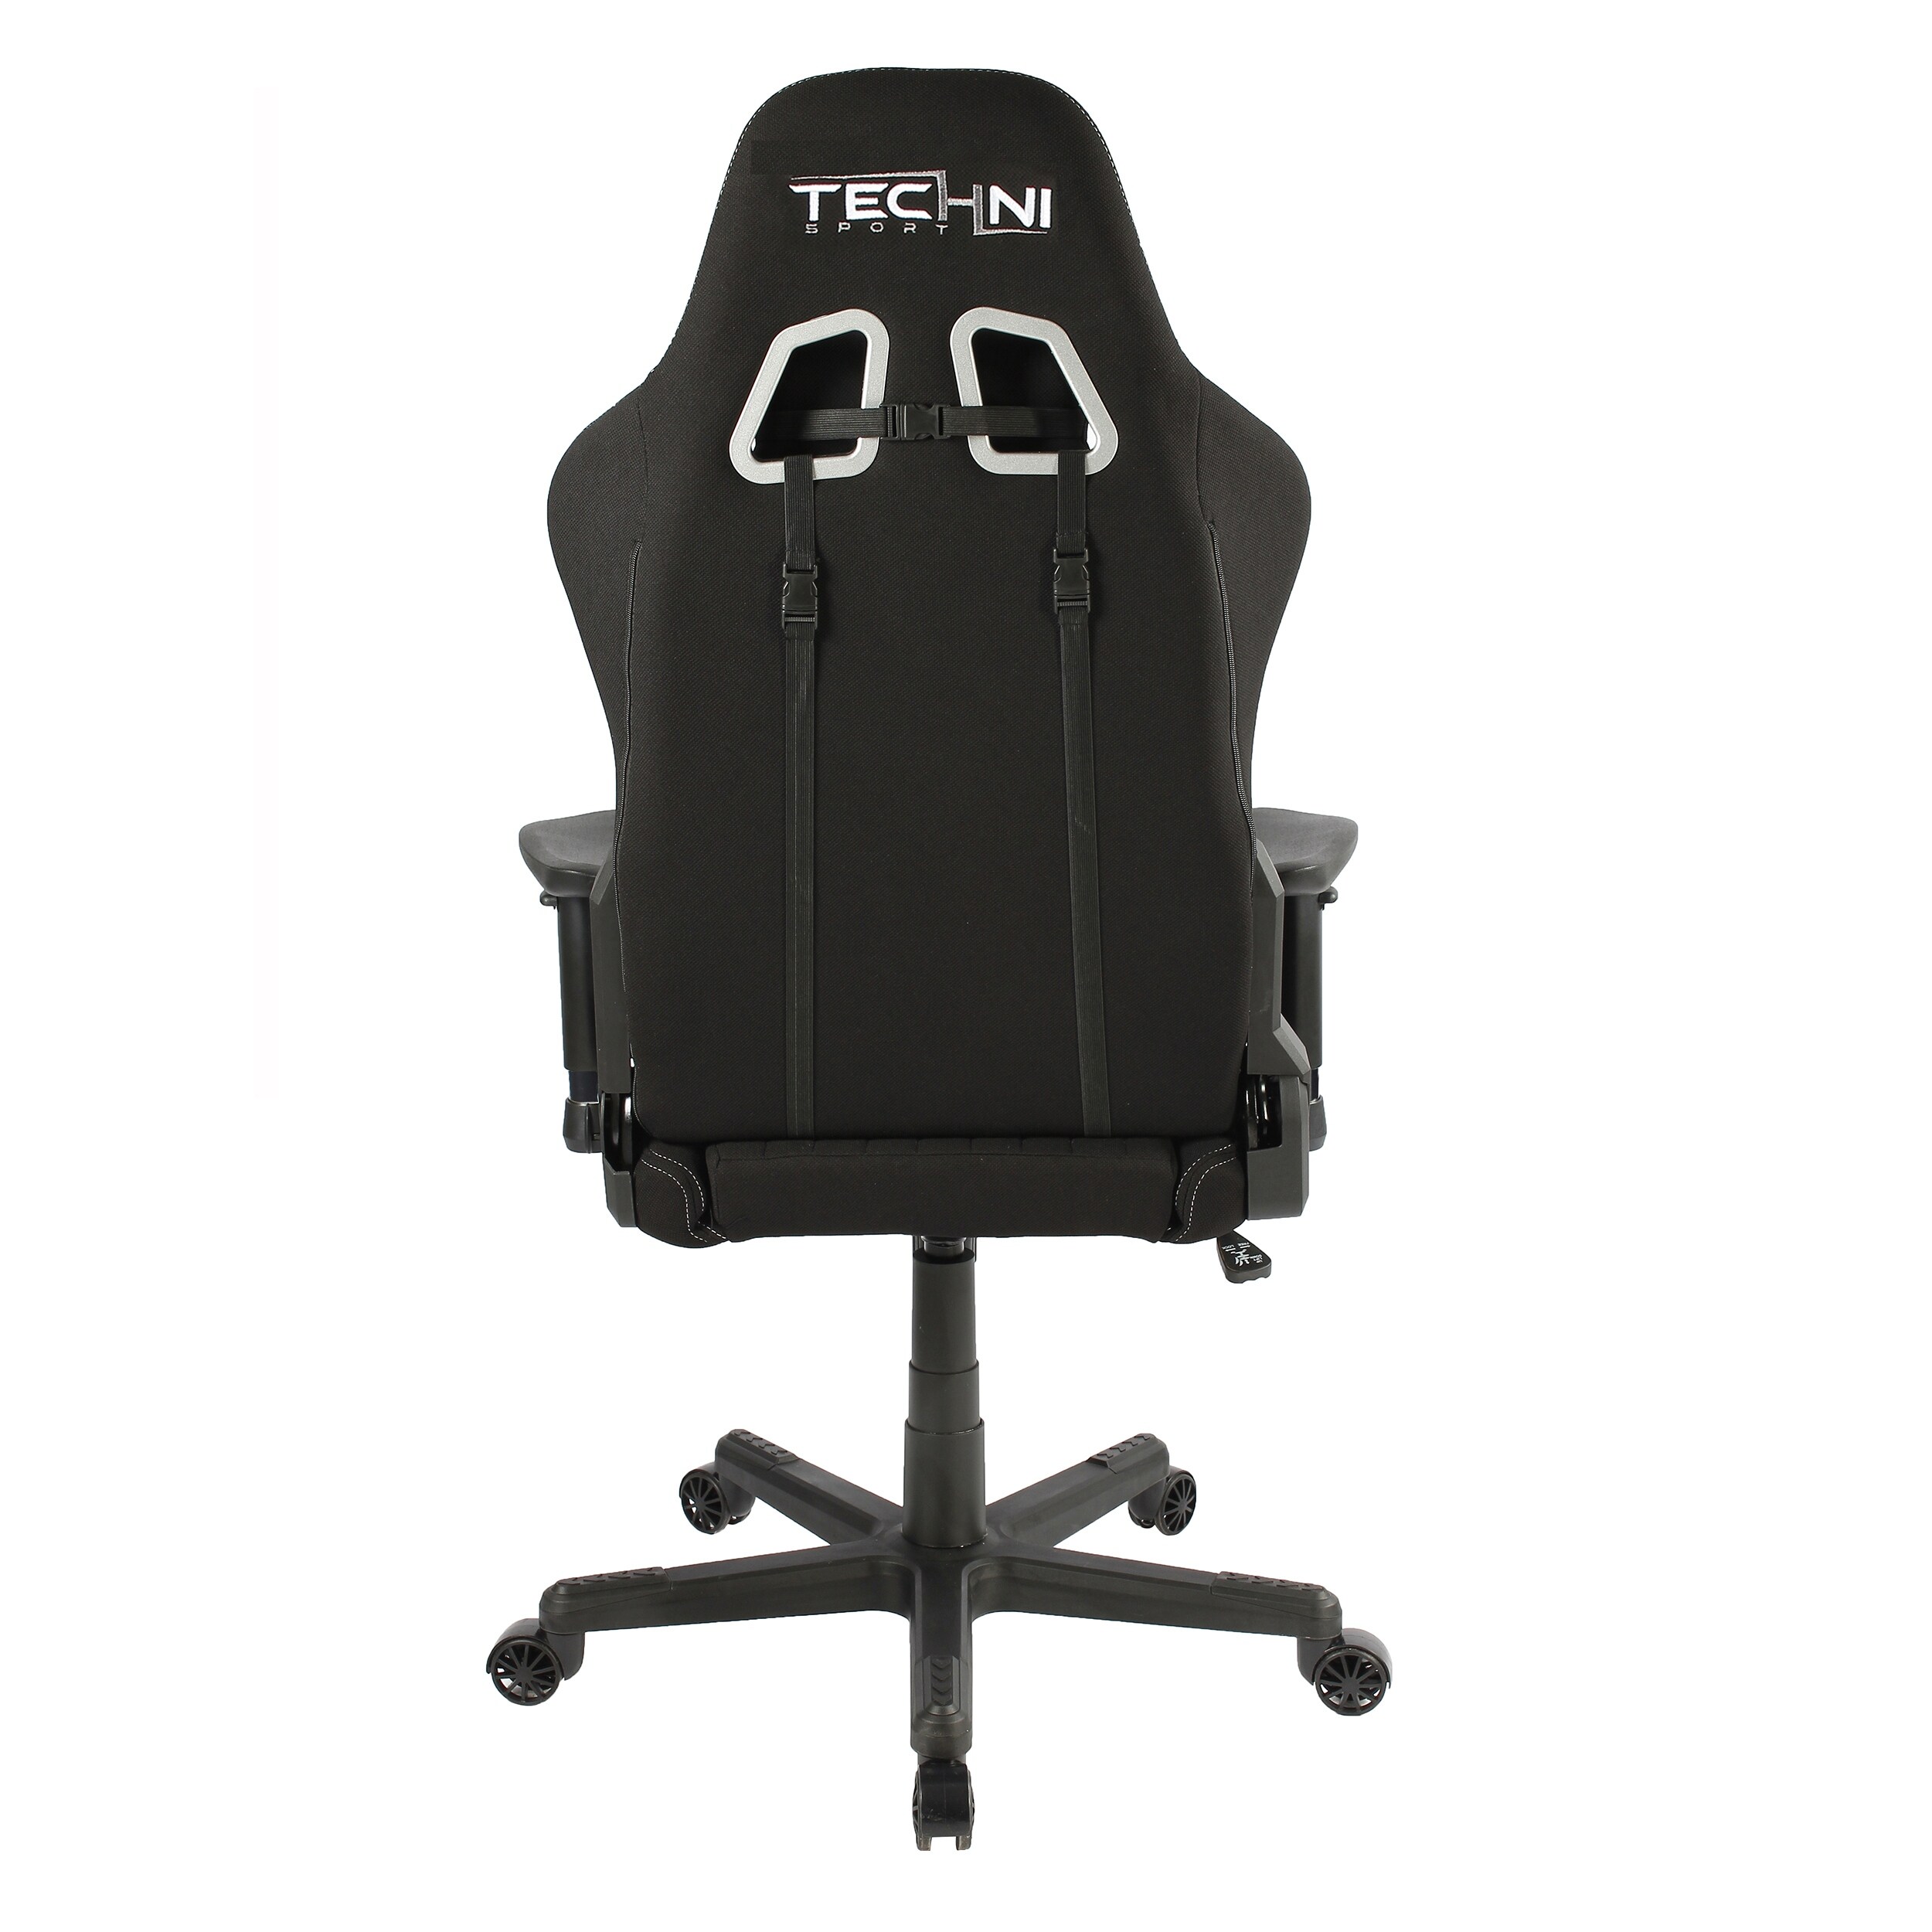 https://ak1.ostkcdn.com/images/products/is/images/direct/a22803615d9e6b6c9462b1803be18d1e44f2eaea/Fabric-Ergonomic-Chair-High-Back-Gaming-Chair-with-Removable-Headrest-Pillow-and-Lumbar-Cushion-with-Non-marking-Casters.jpg